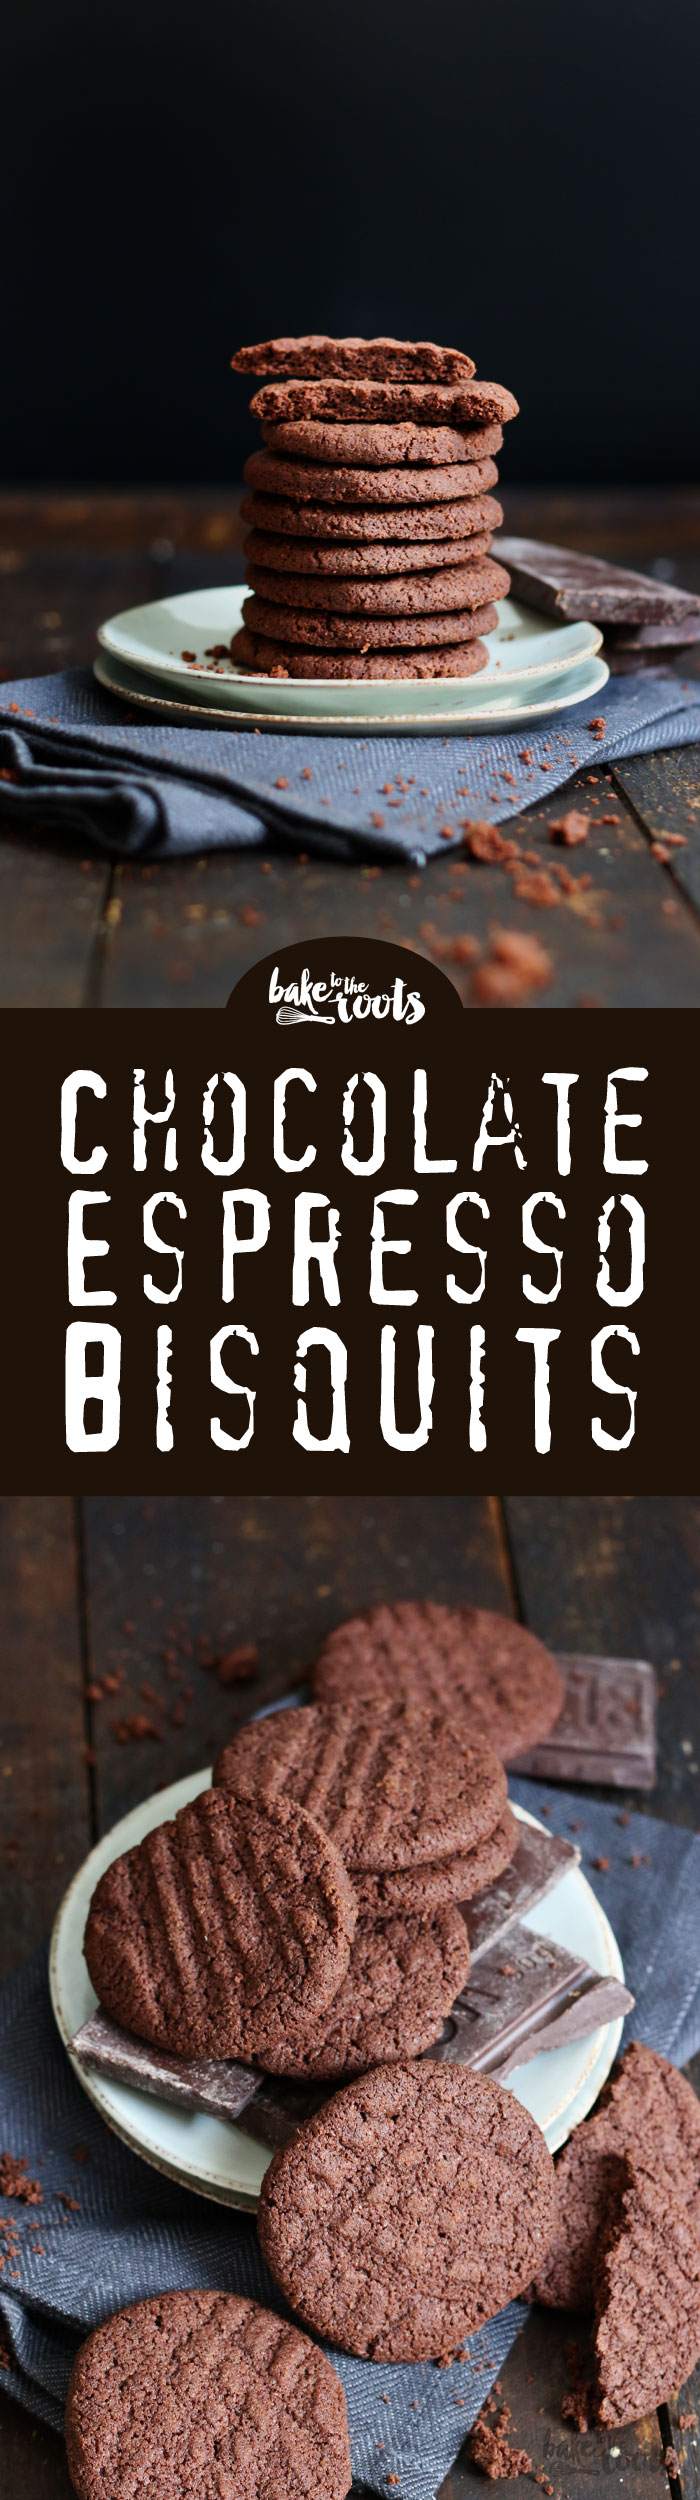 Delicious and easy to prepare chocolate biscuits with a nice espresso flavor | Bake to the roots